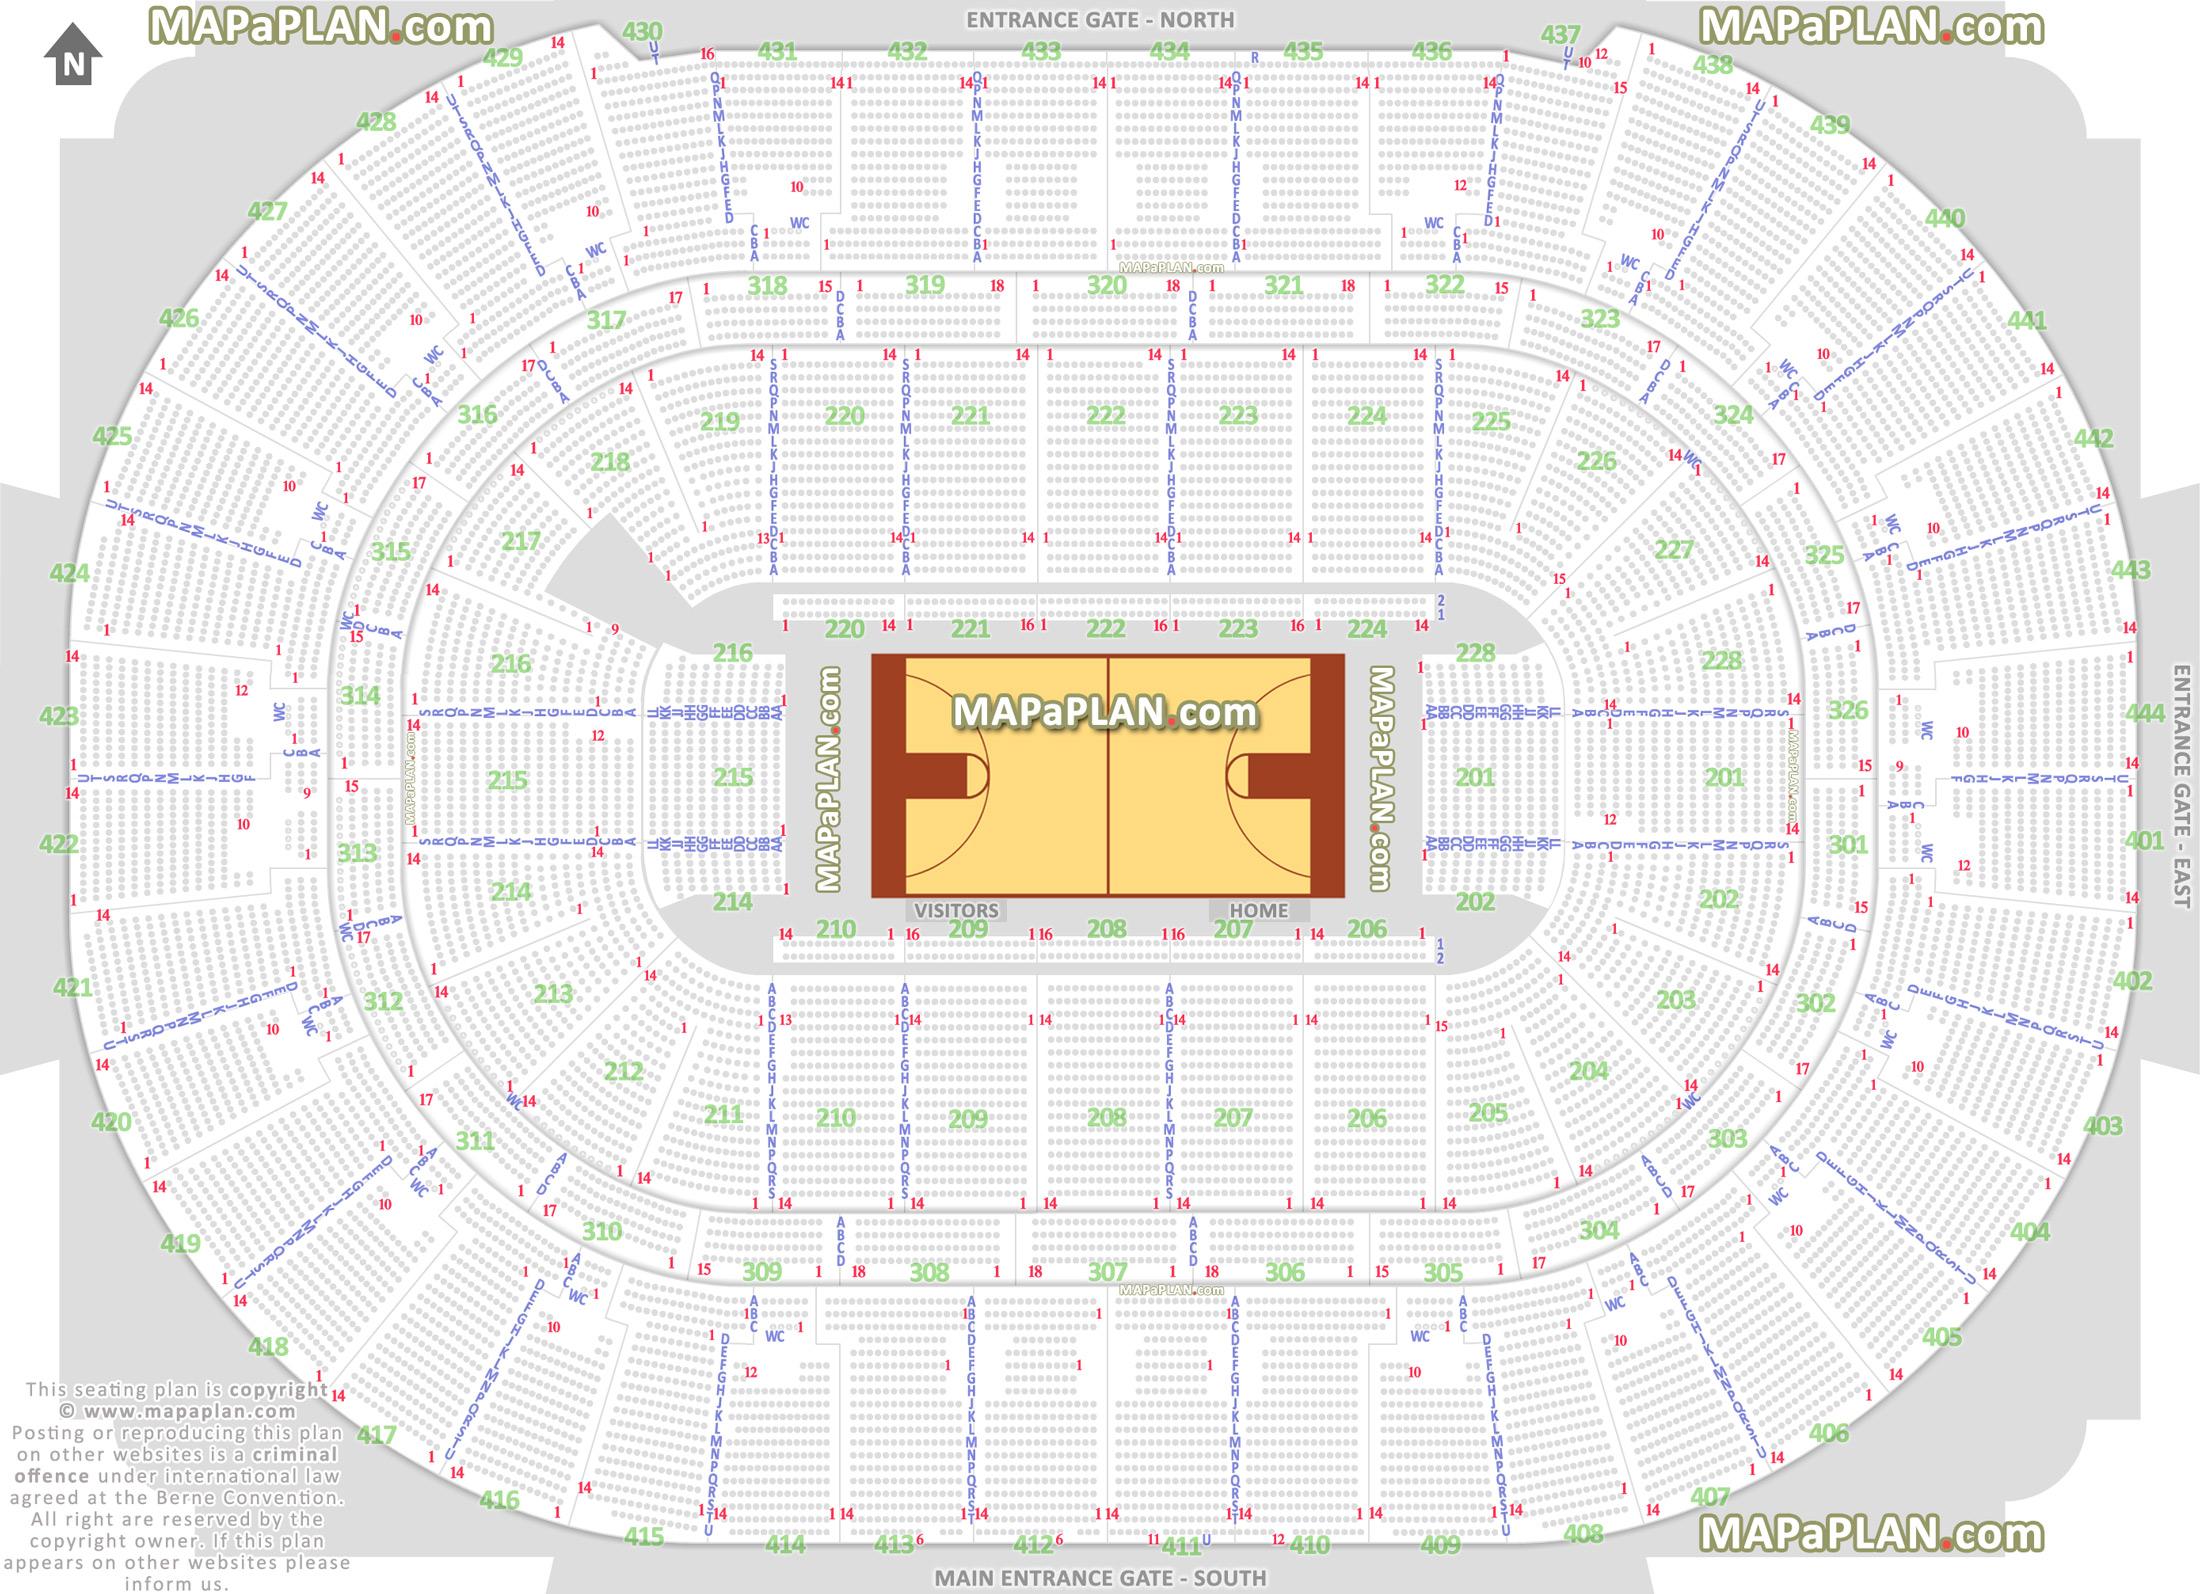 basketball ncaa wooden legacy big west tournament arena court sideline baseline courtside plan how seats rows numbered Anaheim Honda Center seating chart